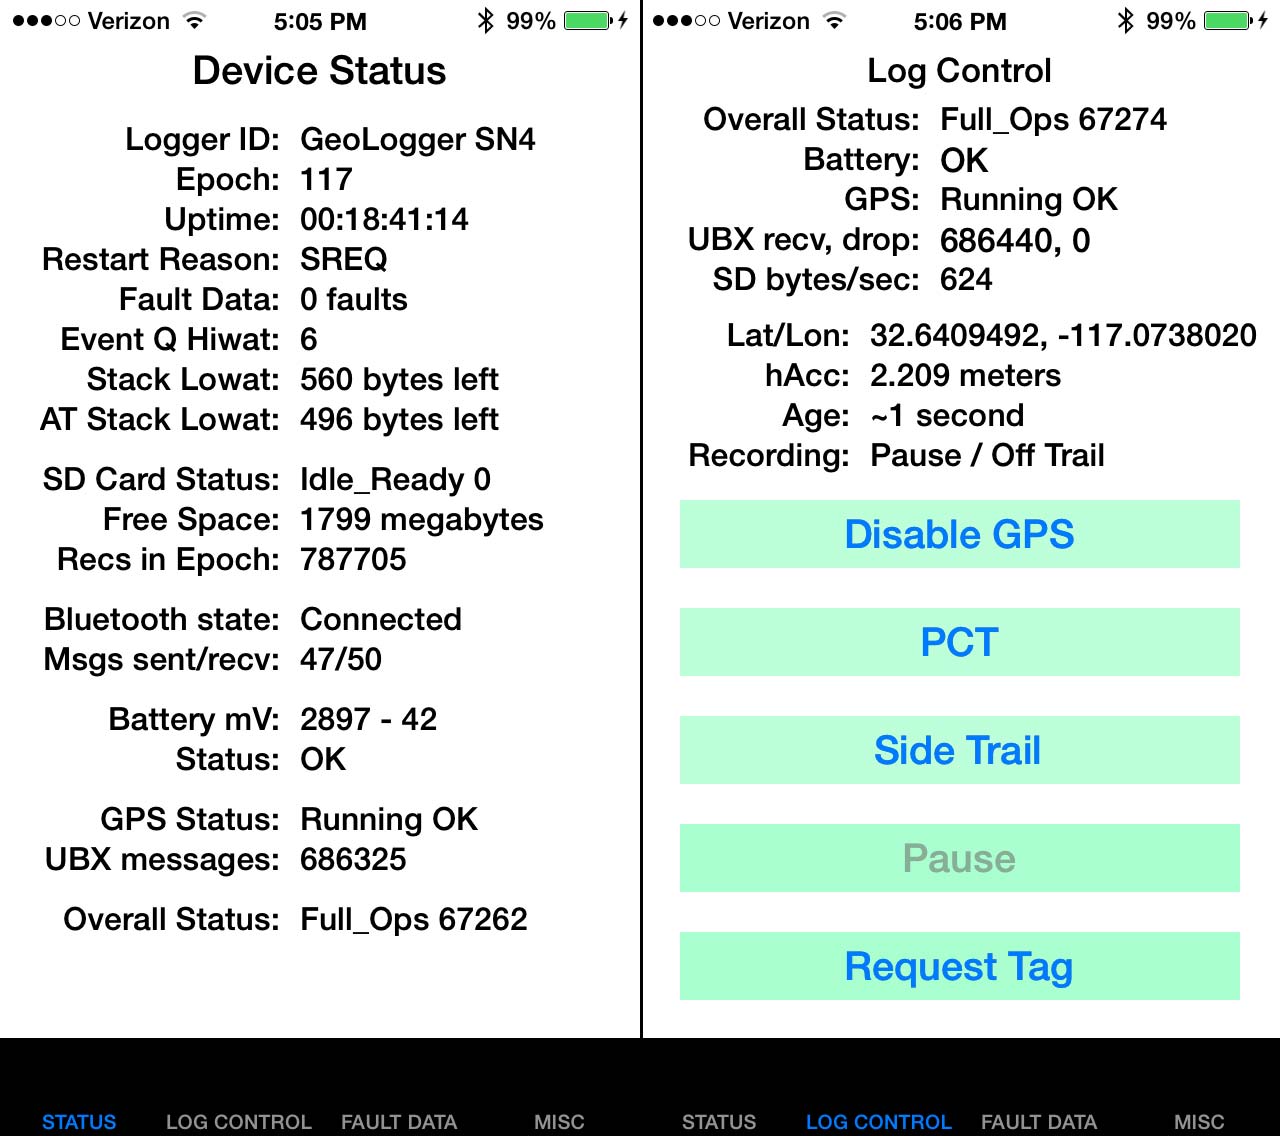 Screen caps for the iPhone application that runs the logger.